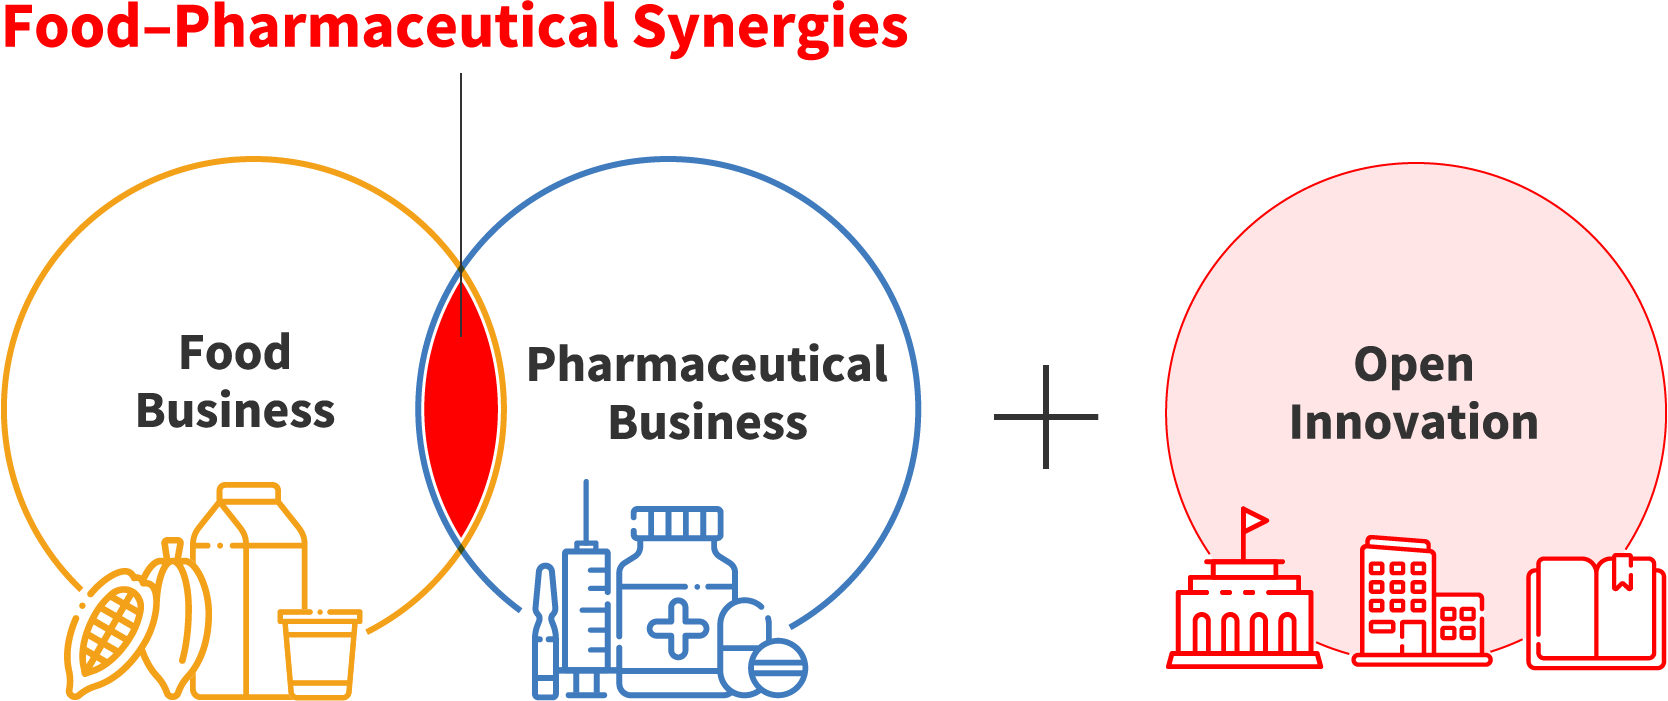 figure of Food-Pharmaceutical synergies